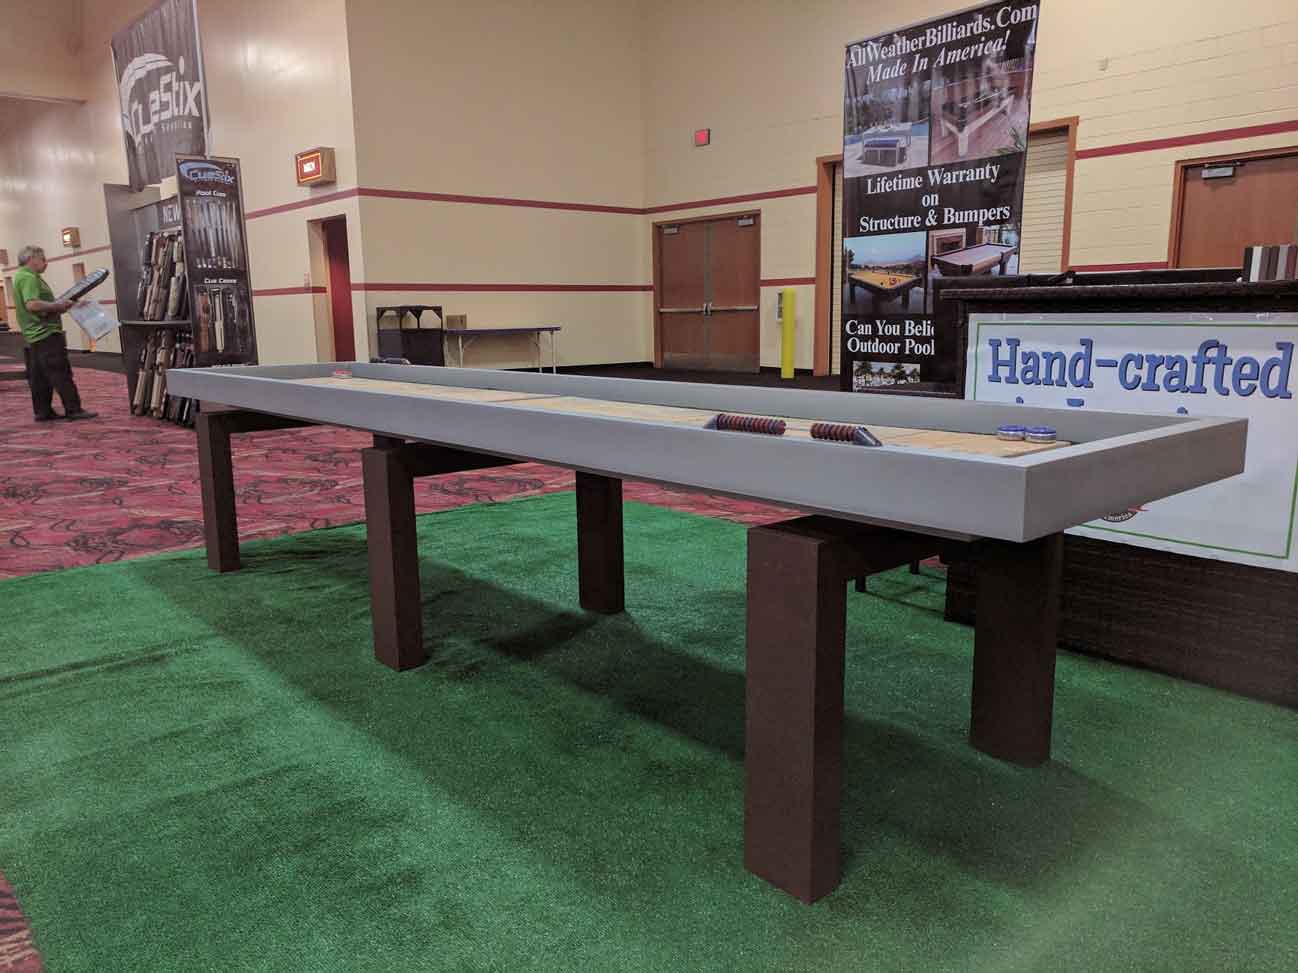 R&R Outdoors Rock Solid Shuffleboard table showcased at the Billiards Congress of America Show 2017